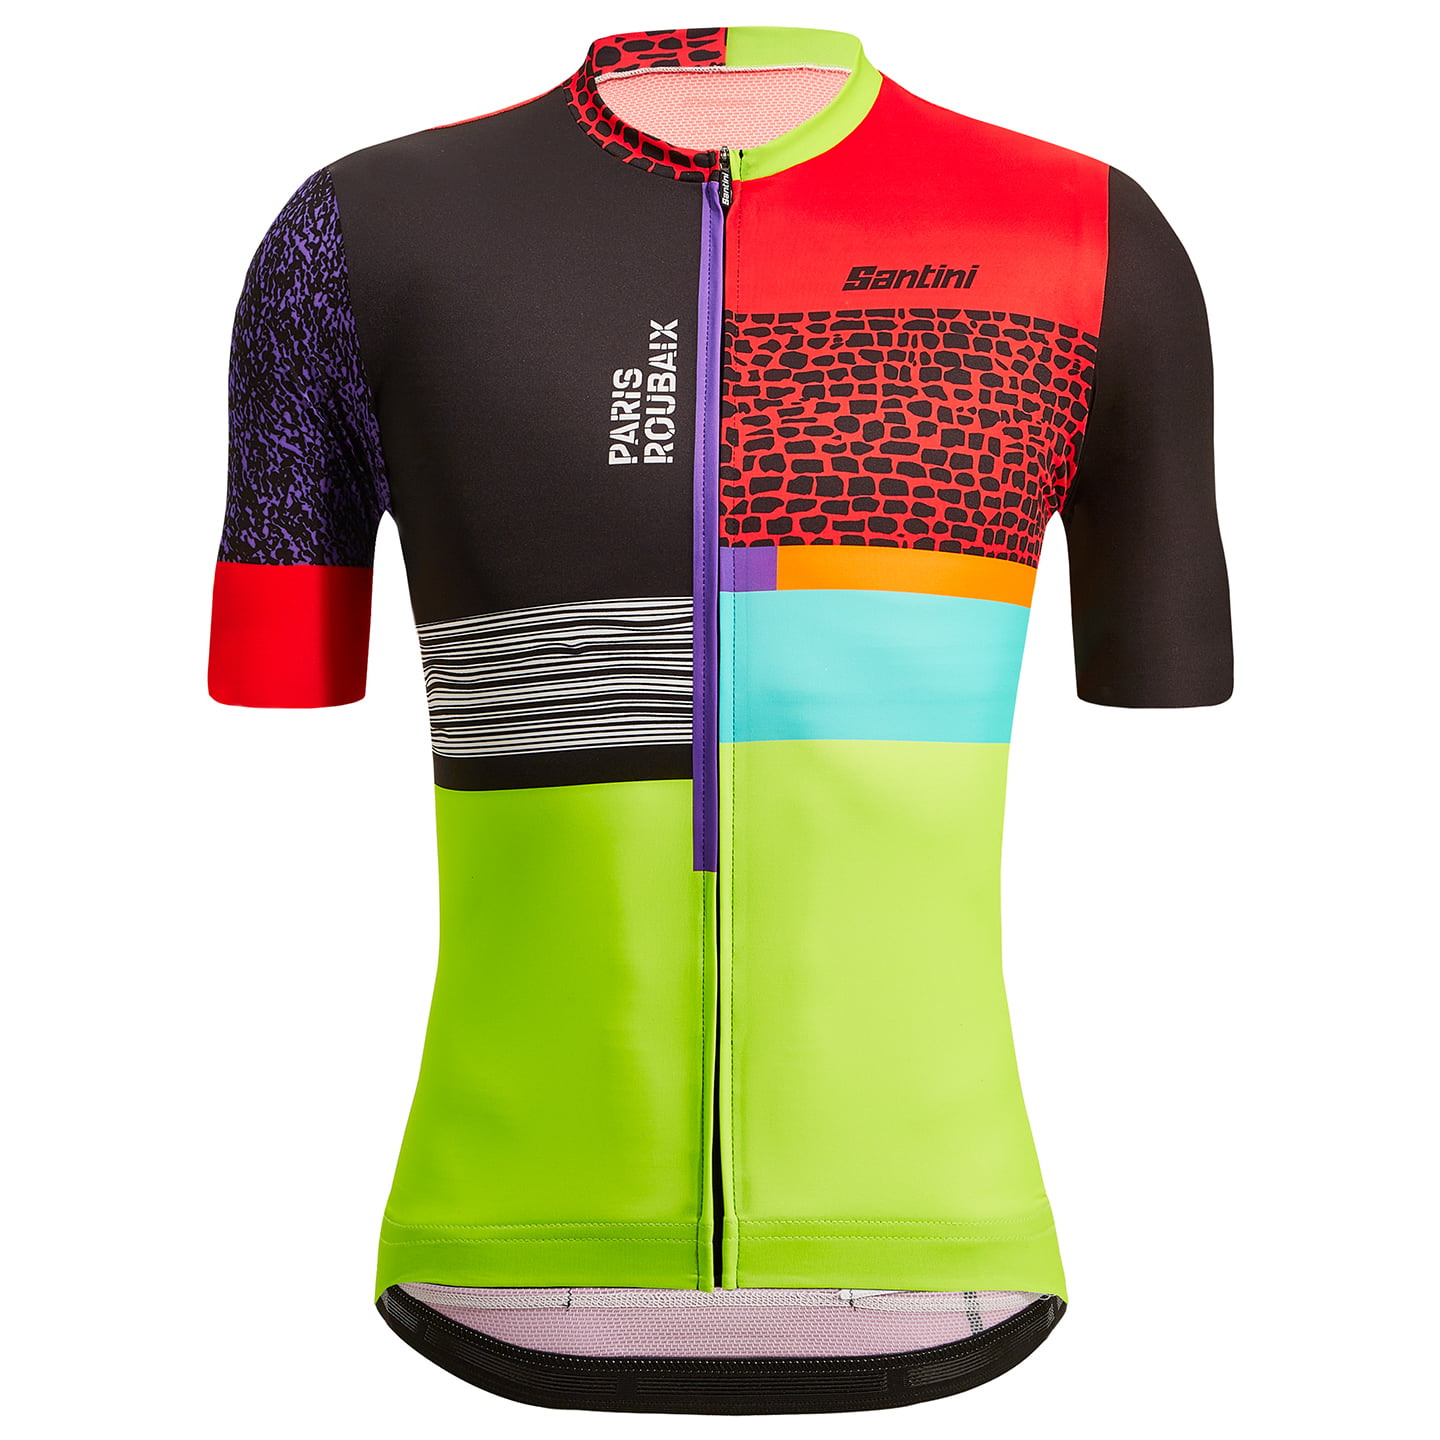 SANTINI Paris-Roubaix Forgers des Heroes 2023 Short Sleeve Jersey, for men, size M, Cycle jersey, Cycling clothing